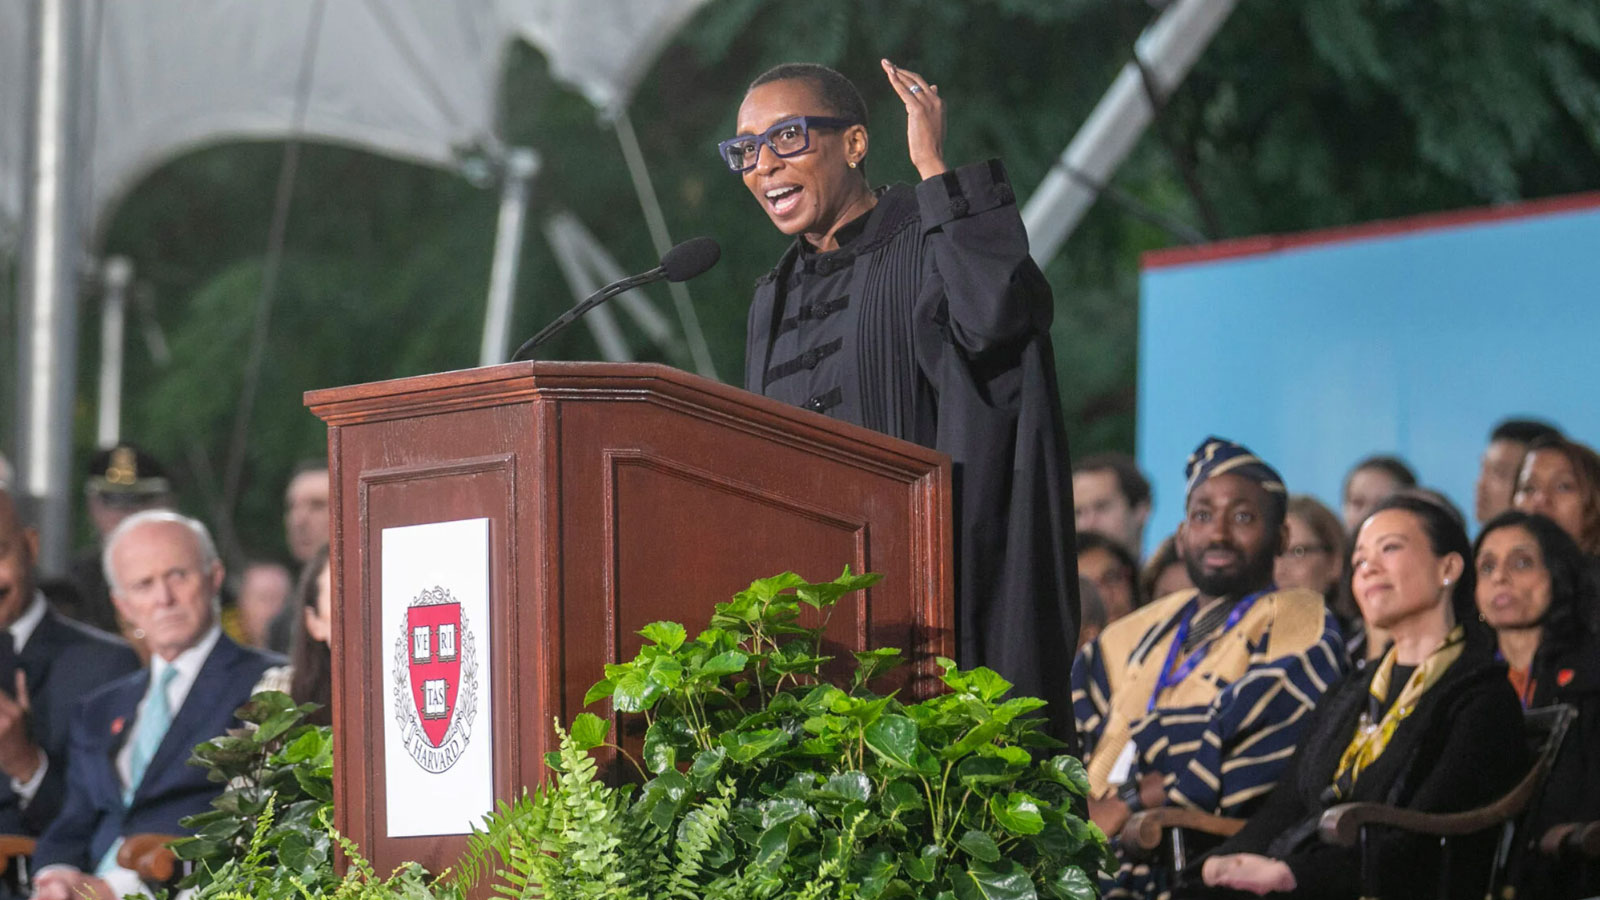 Gay sees in Harvard the courage to change the world